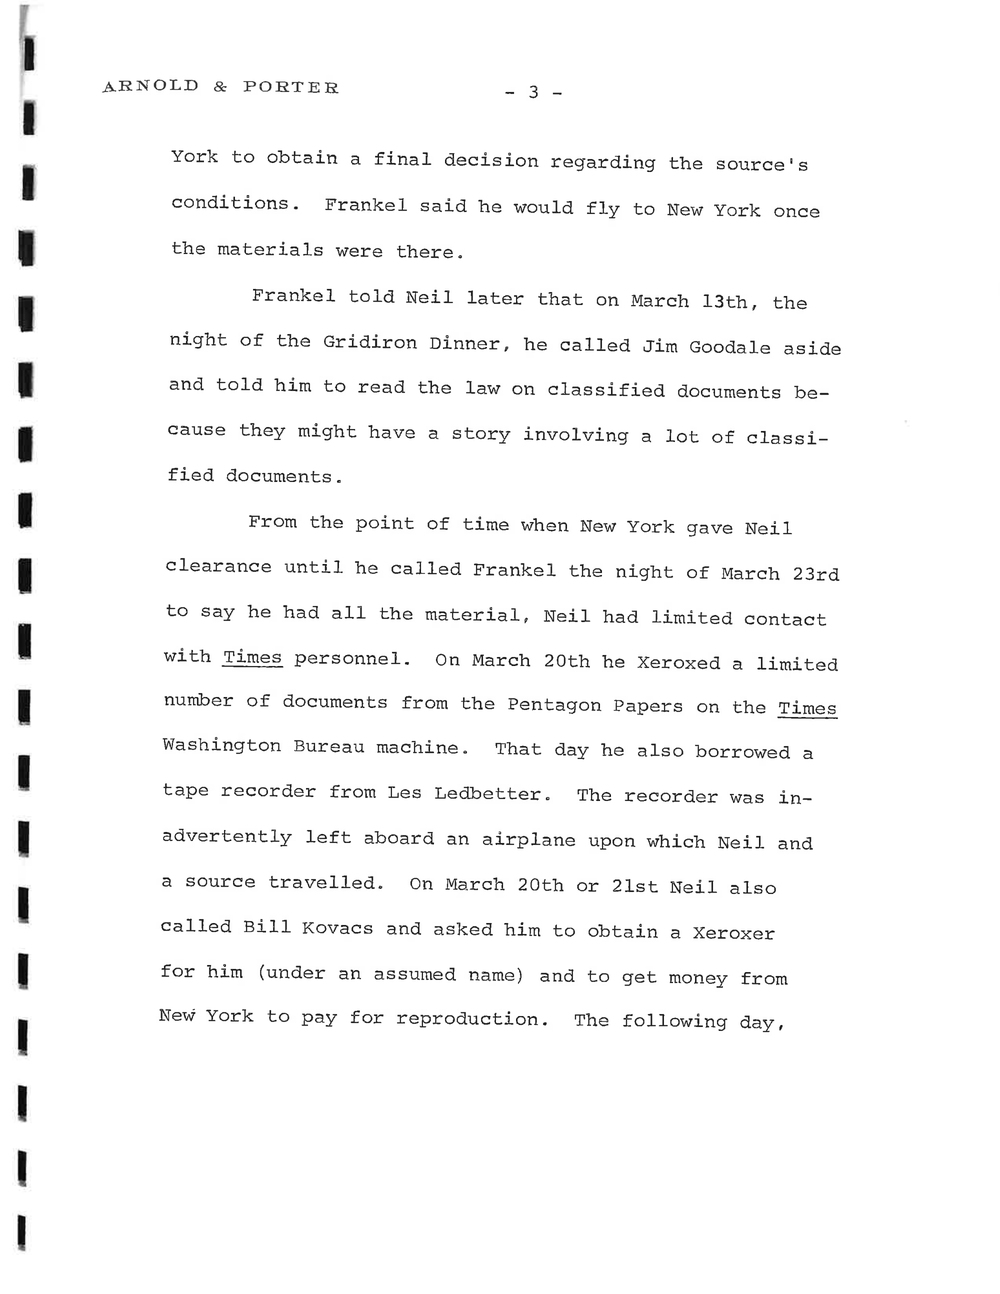 Page 3 from Rogovin Sheehan memo